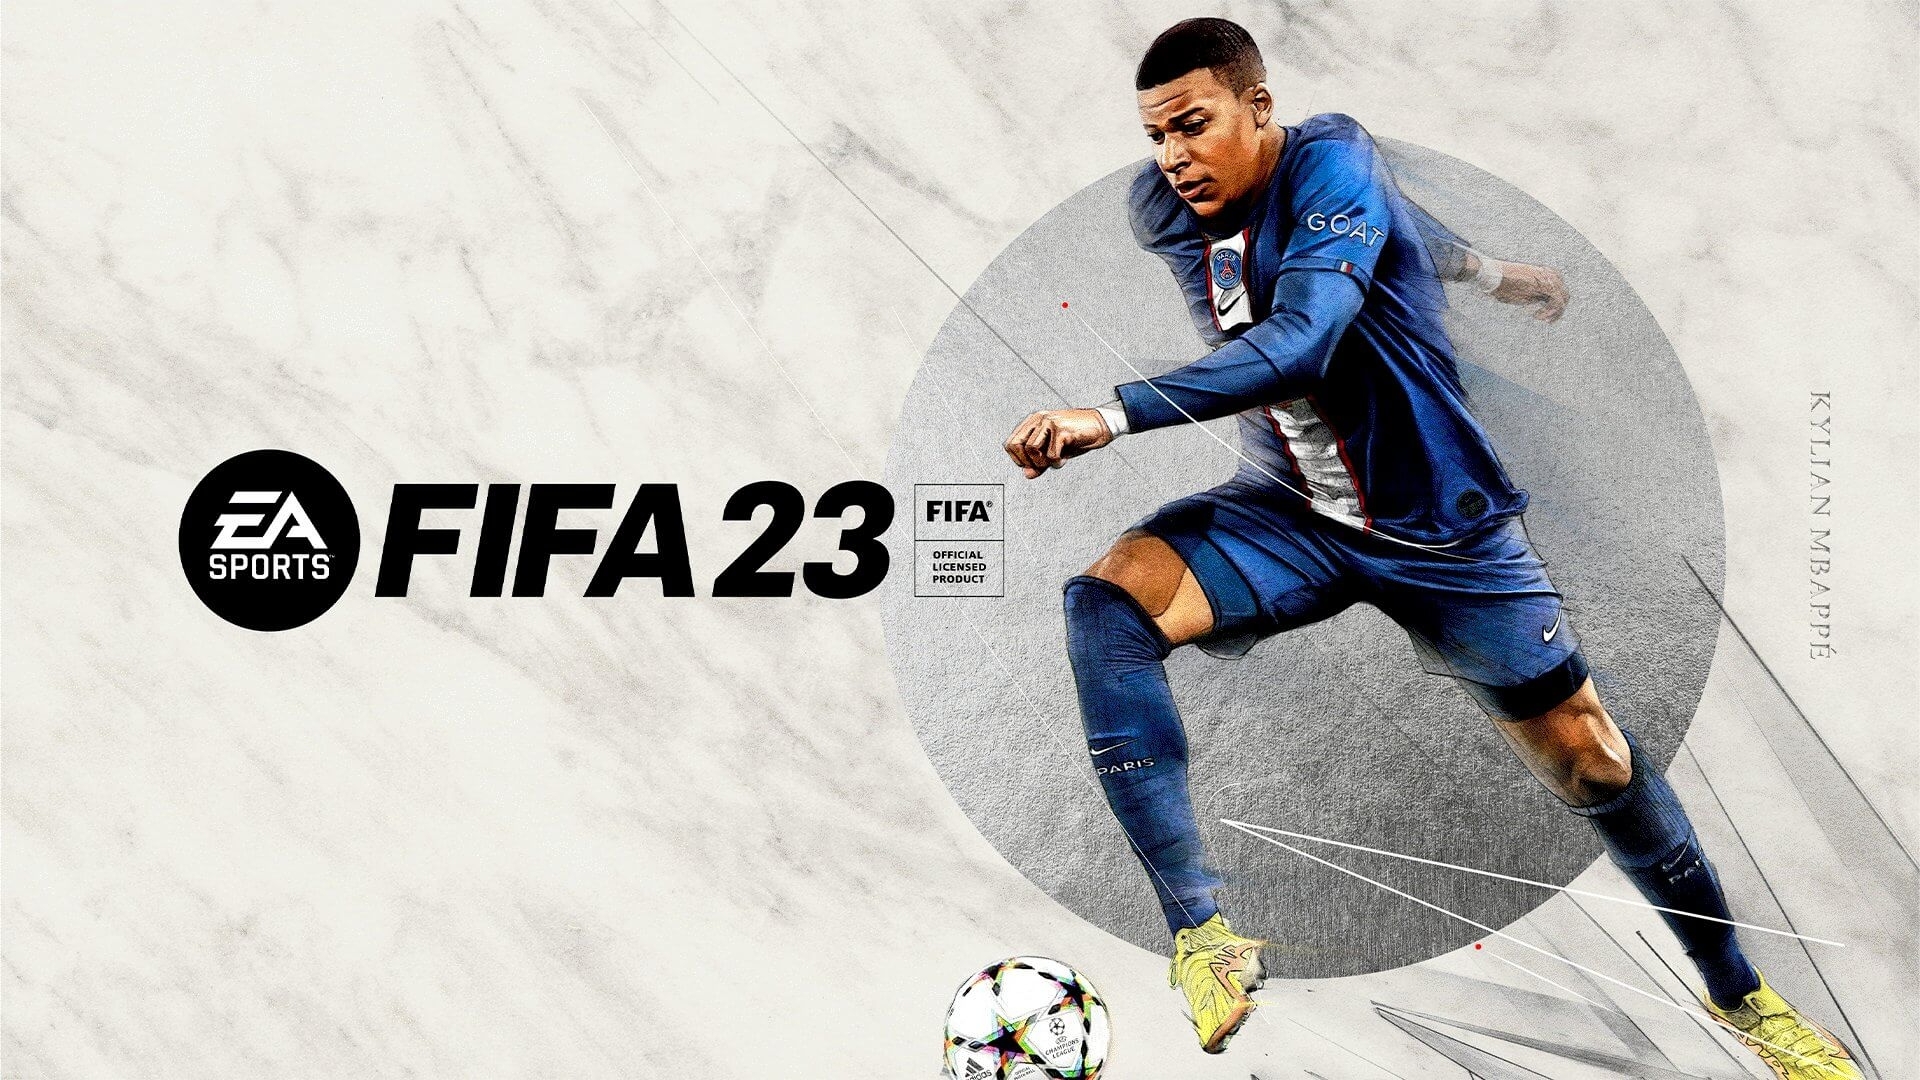 Web App for EA Sports FIFA 23 is now Live